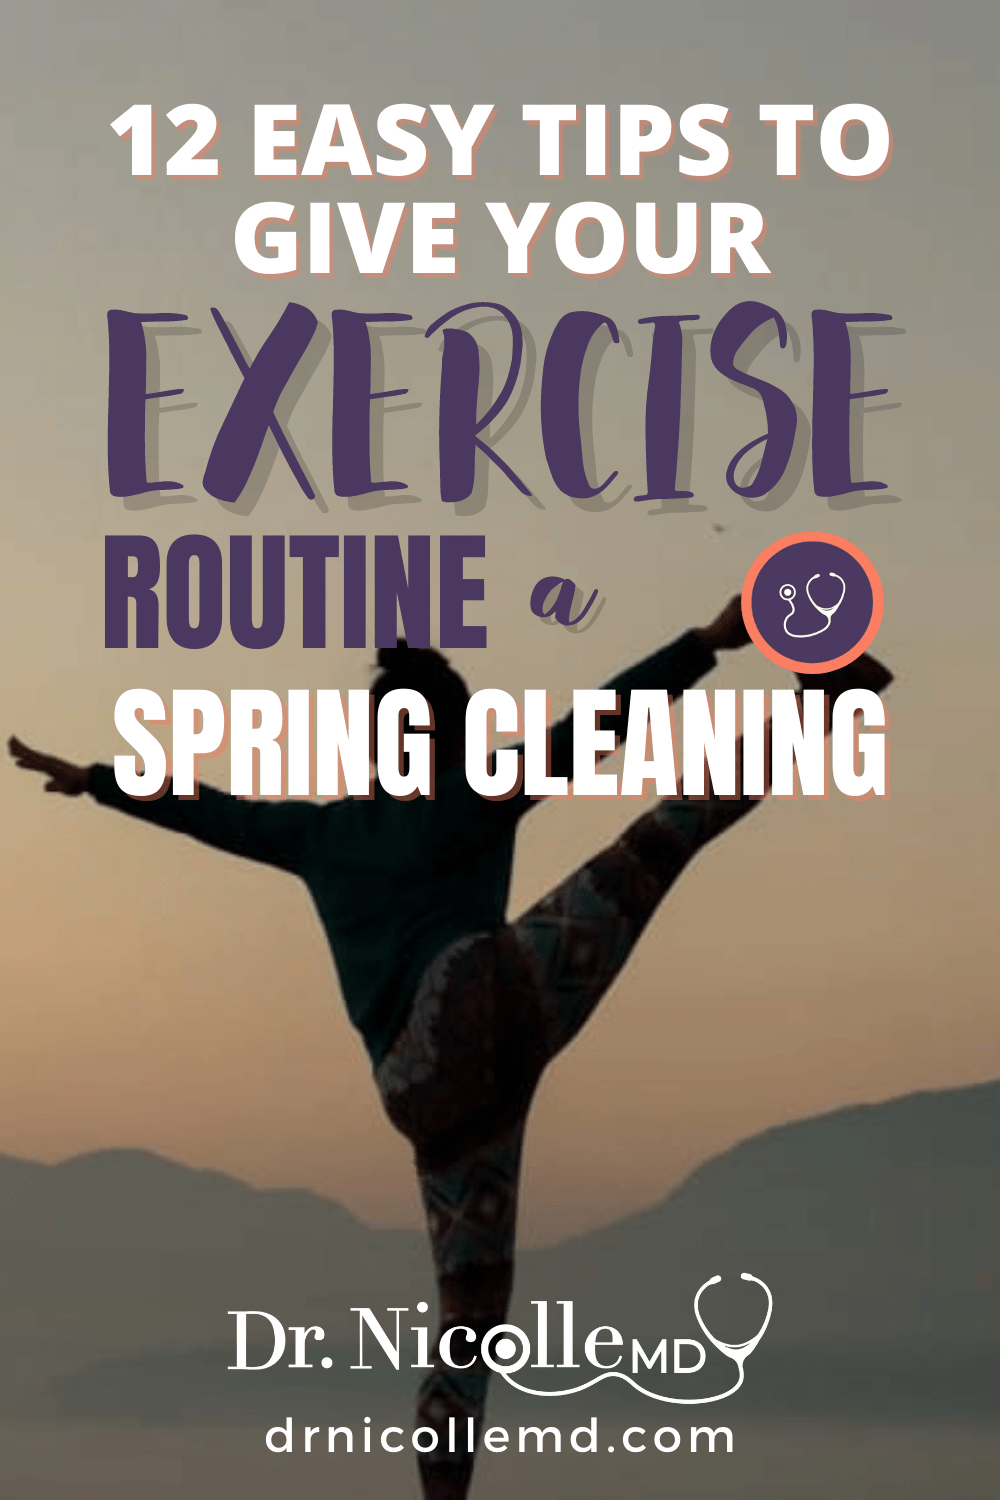 , 12 Easy Tips To Give Your Exercise Routine a Spring Cleaning, Dr. Nicolle